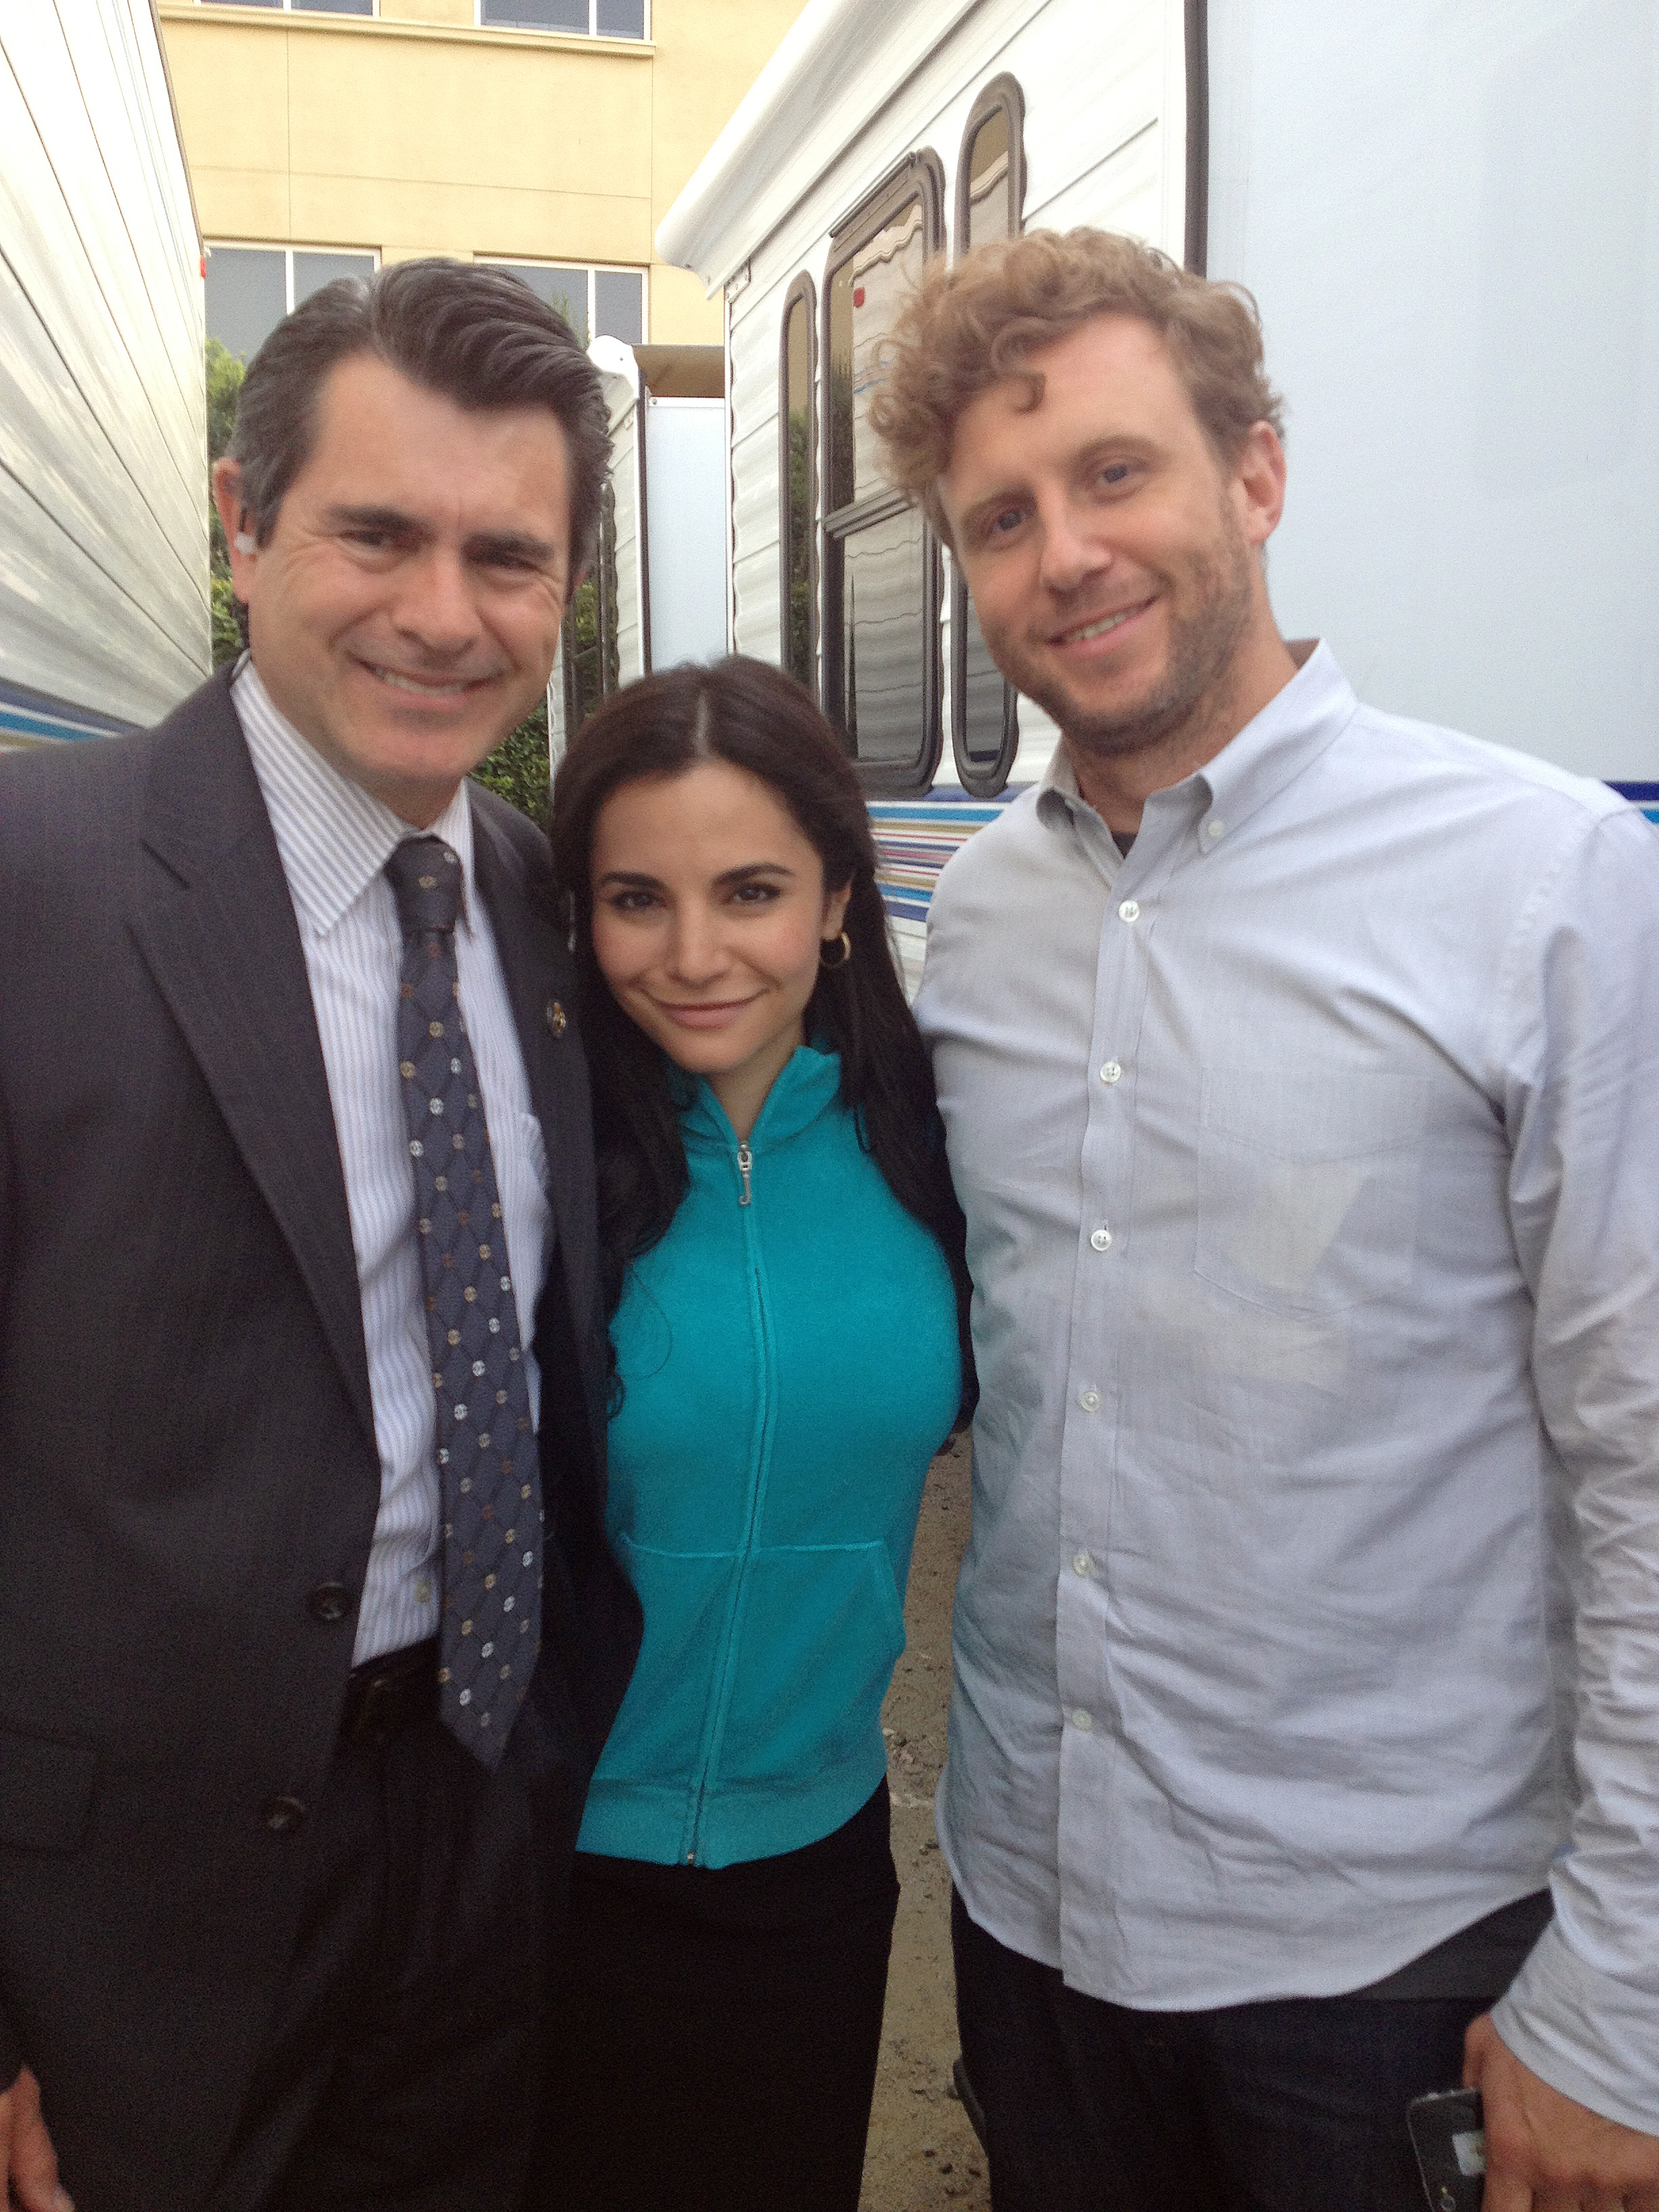 Francisco Javier Gomez With The Beautiful Mexican Actress Martha Higareda and the Great Director Ruben Fleischer On Location, Pilot Season March 16, 2013